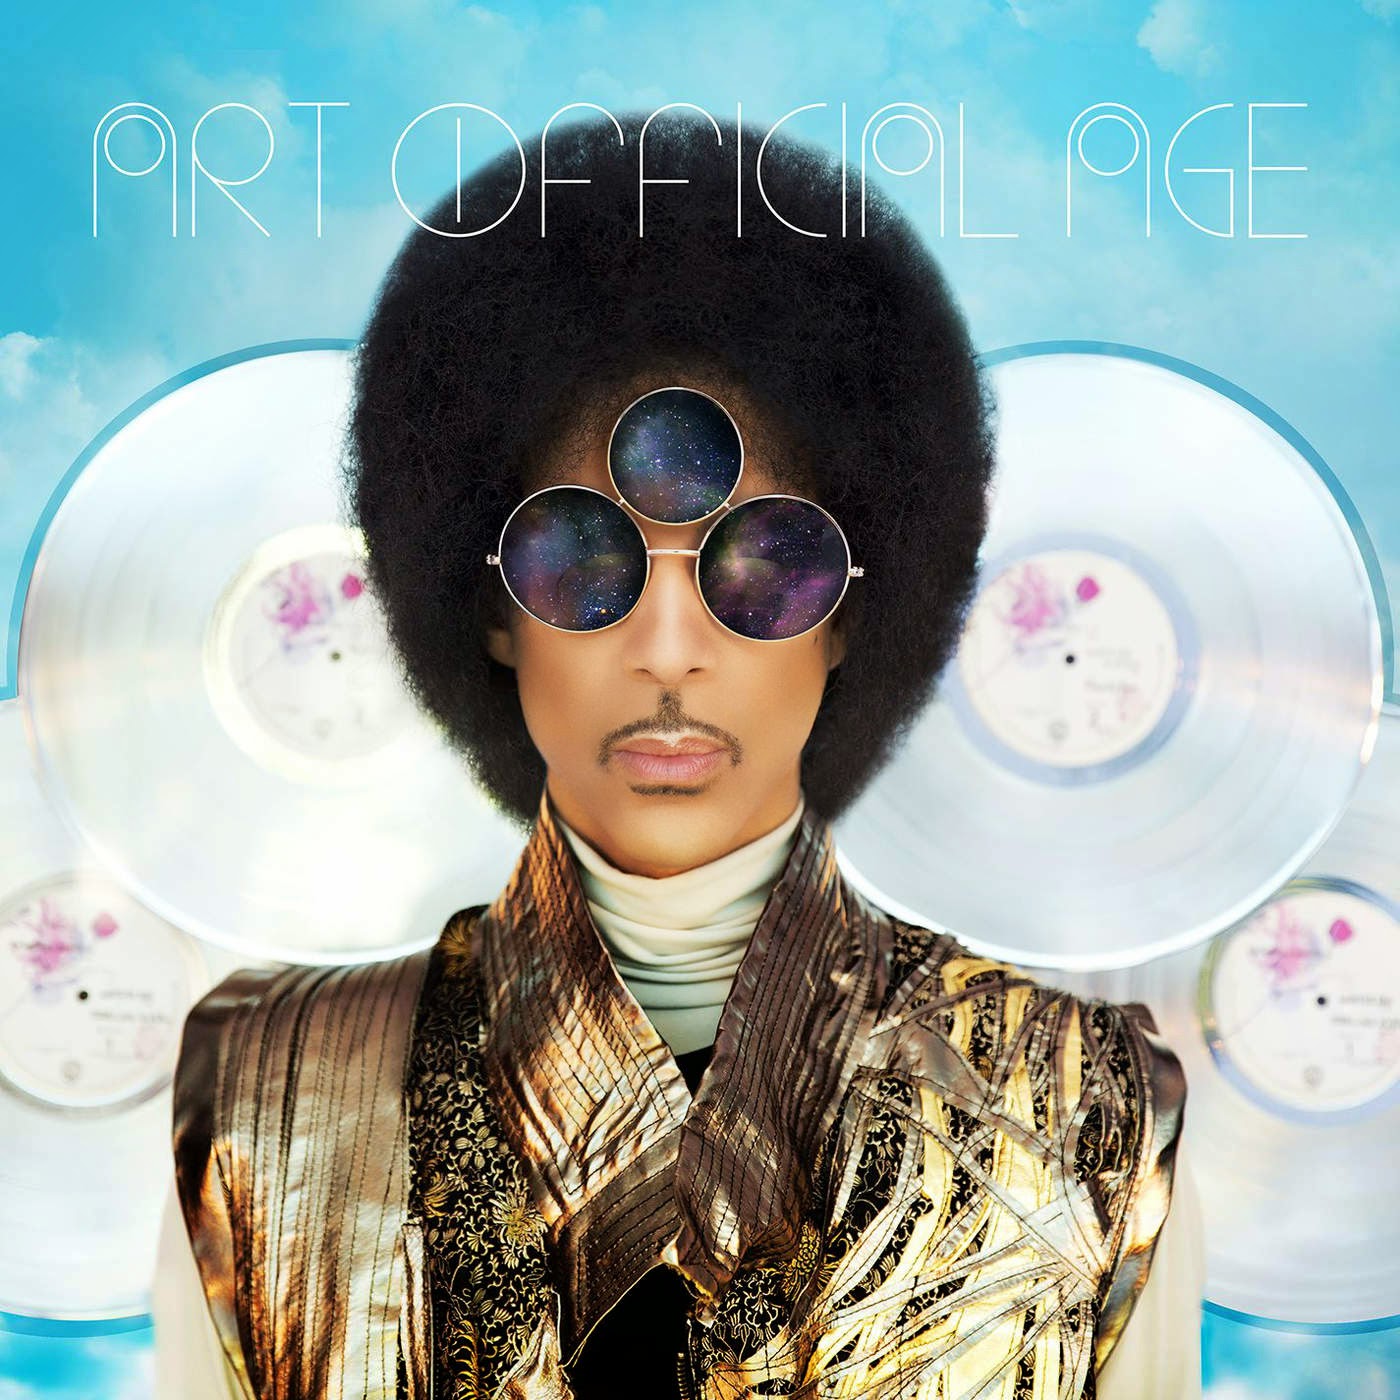 Prince, "Art Official Age"